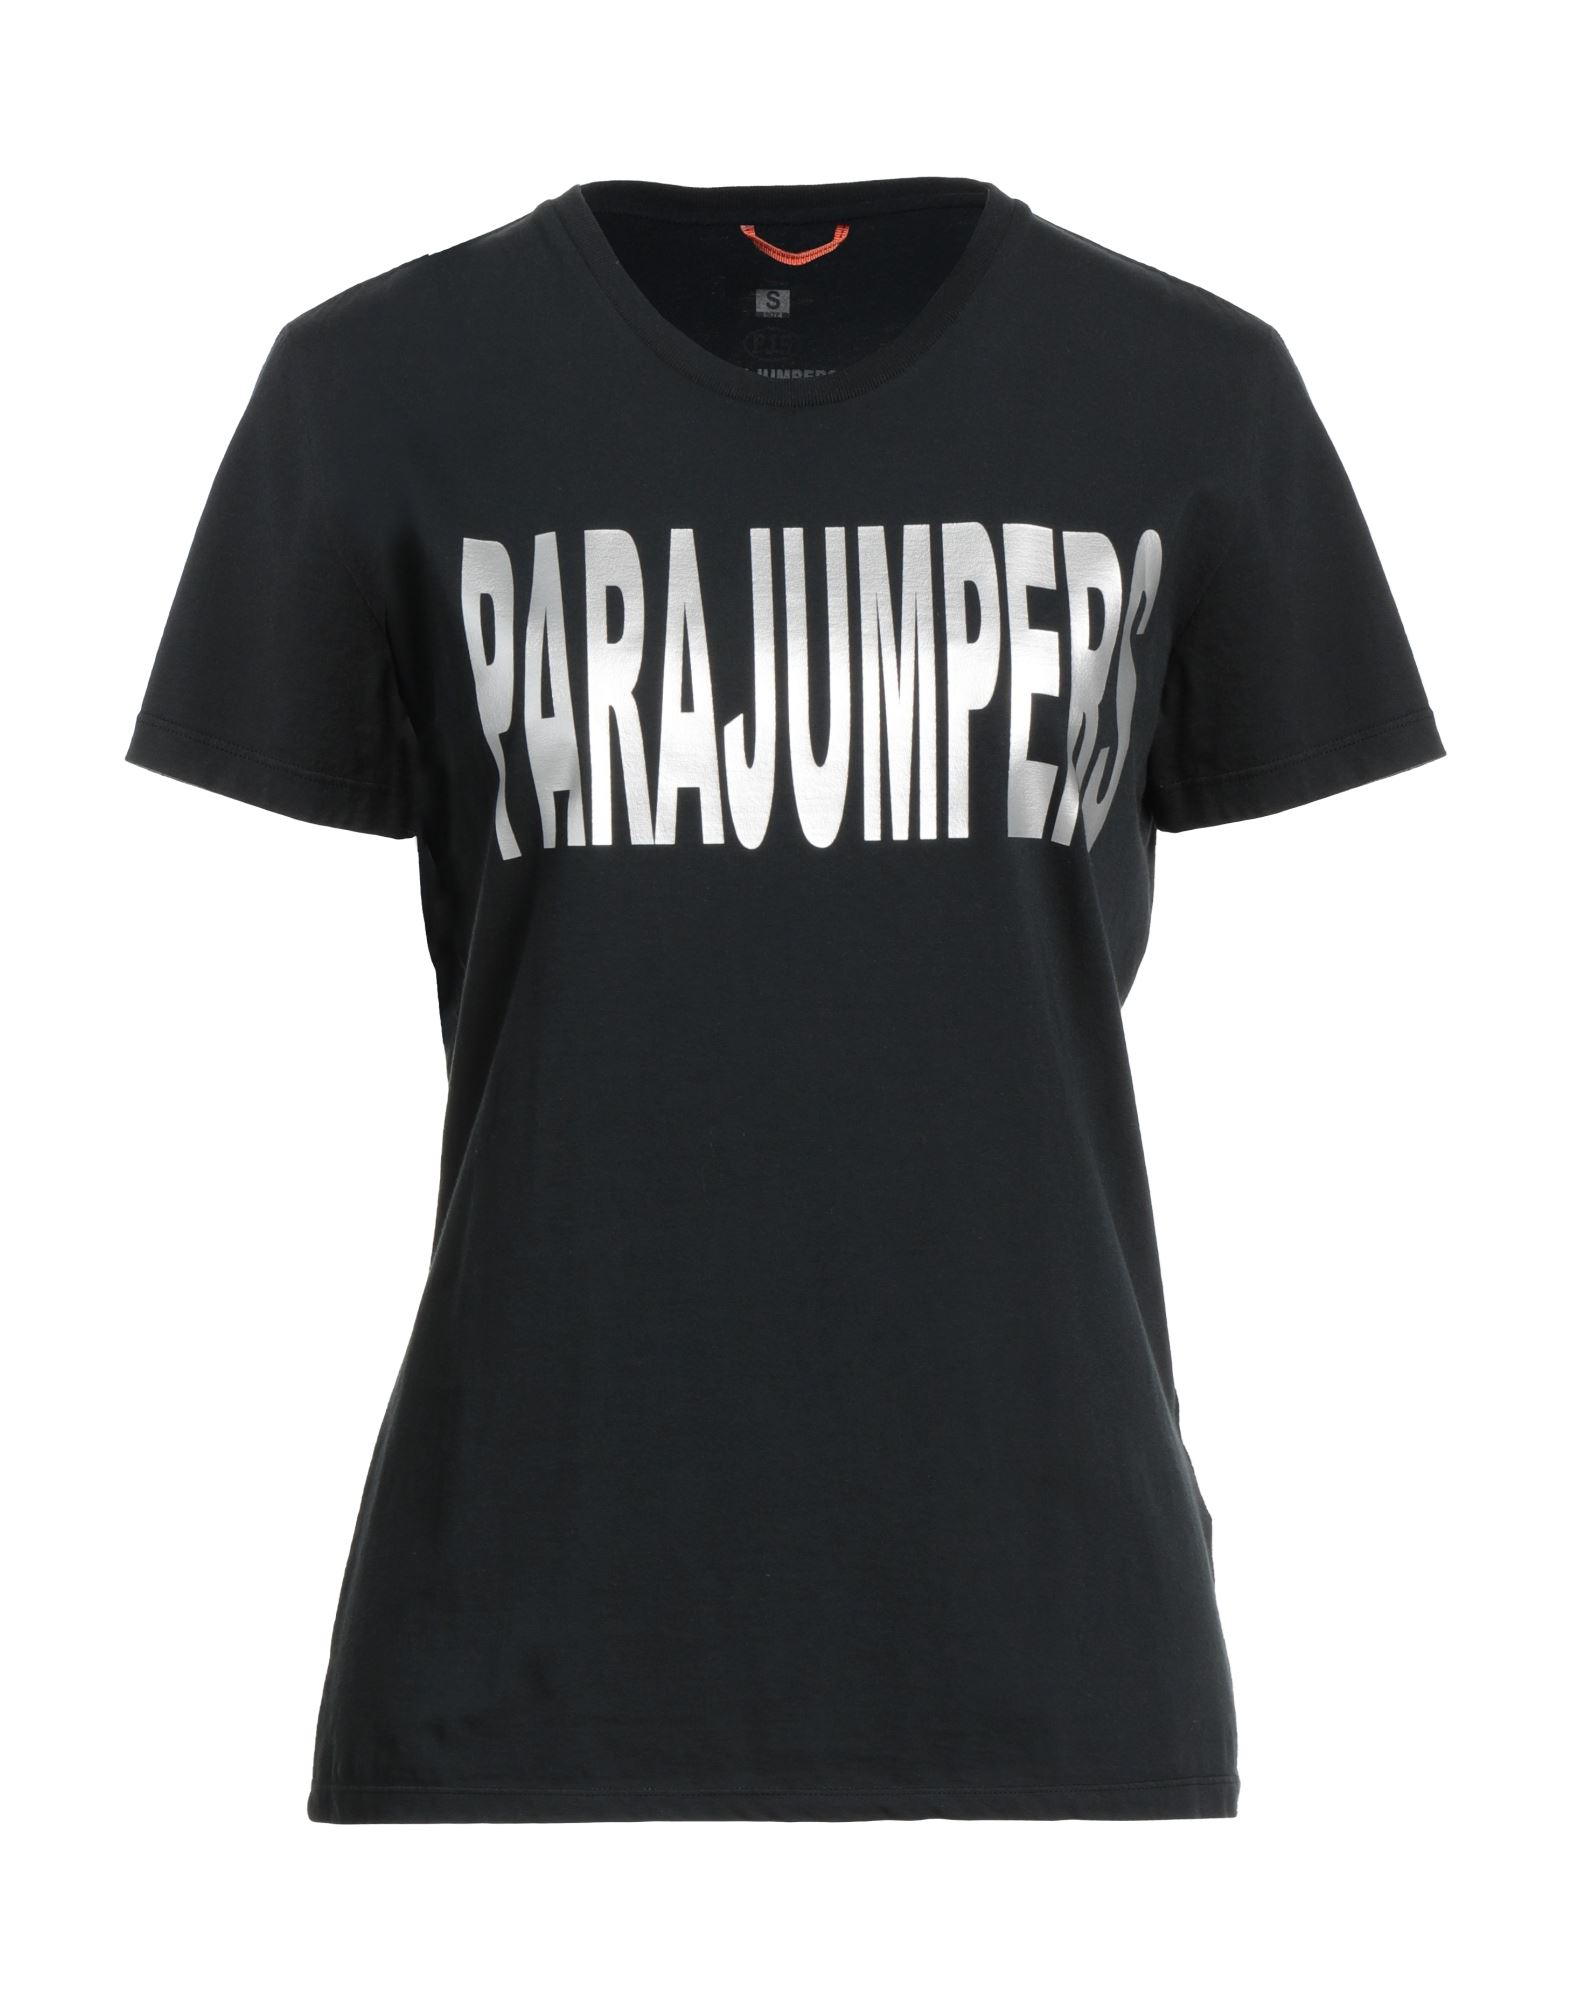 Parajumpers T-shirts In Black